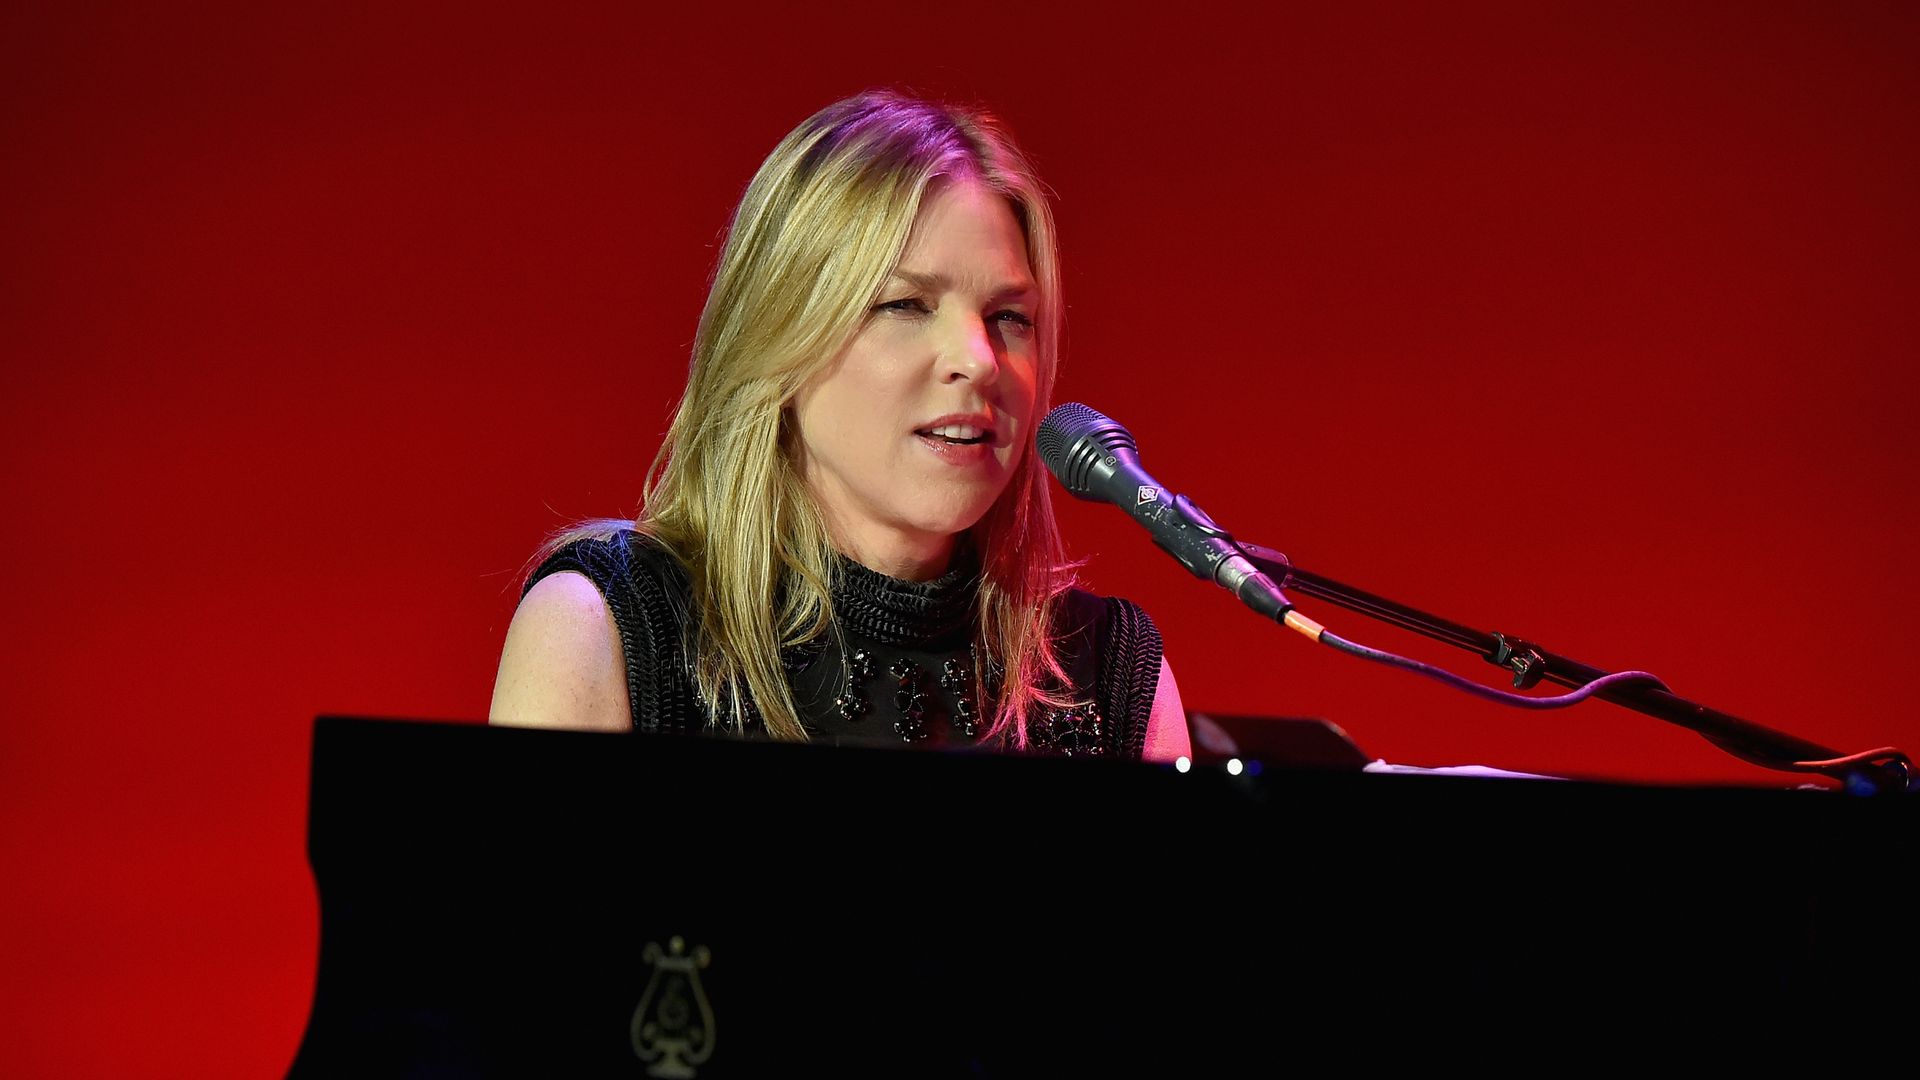 Diana Krall at the Elton John AIDS Foundation event in 2016